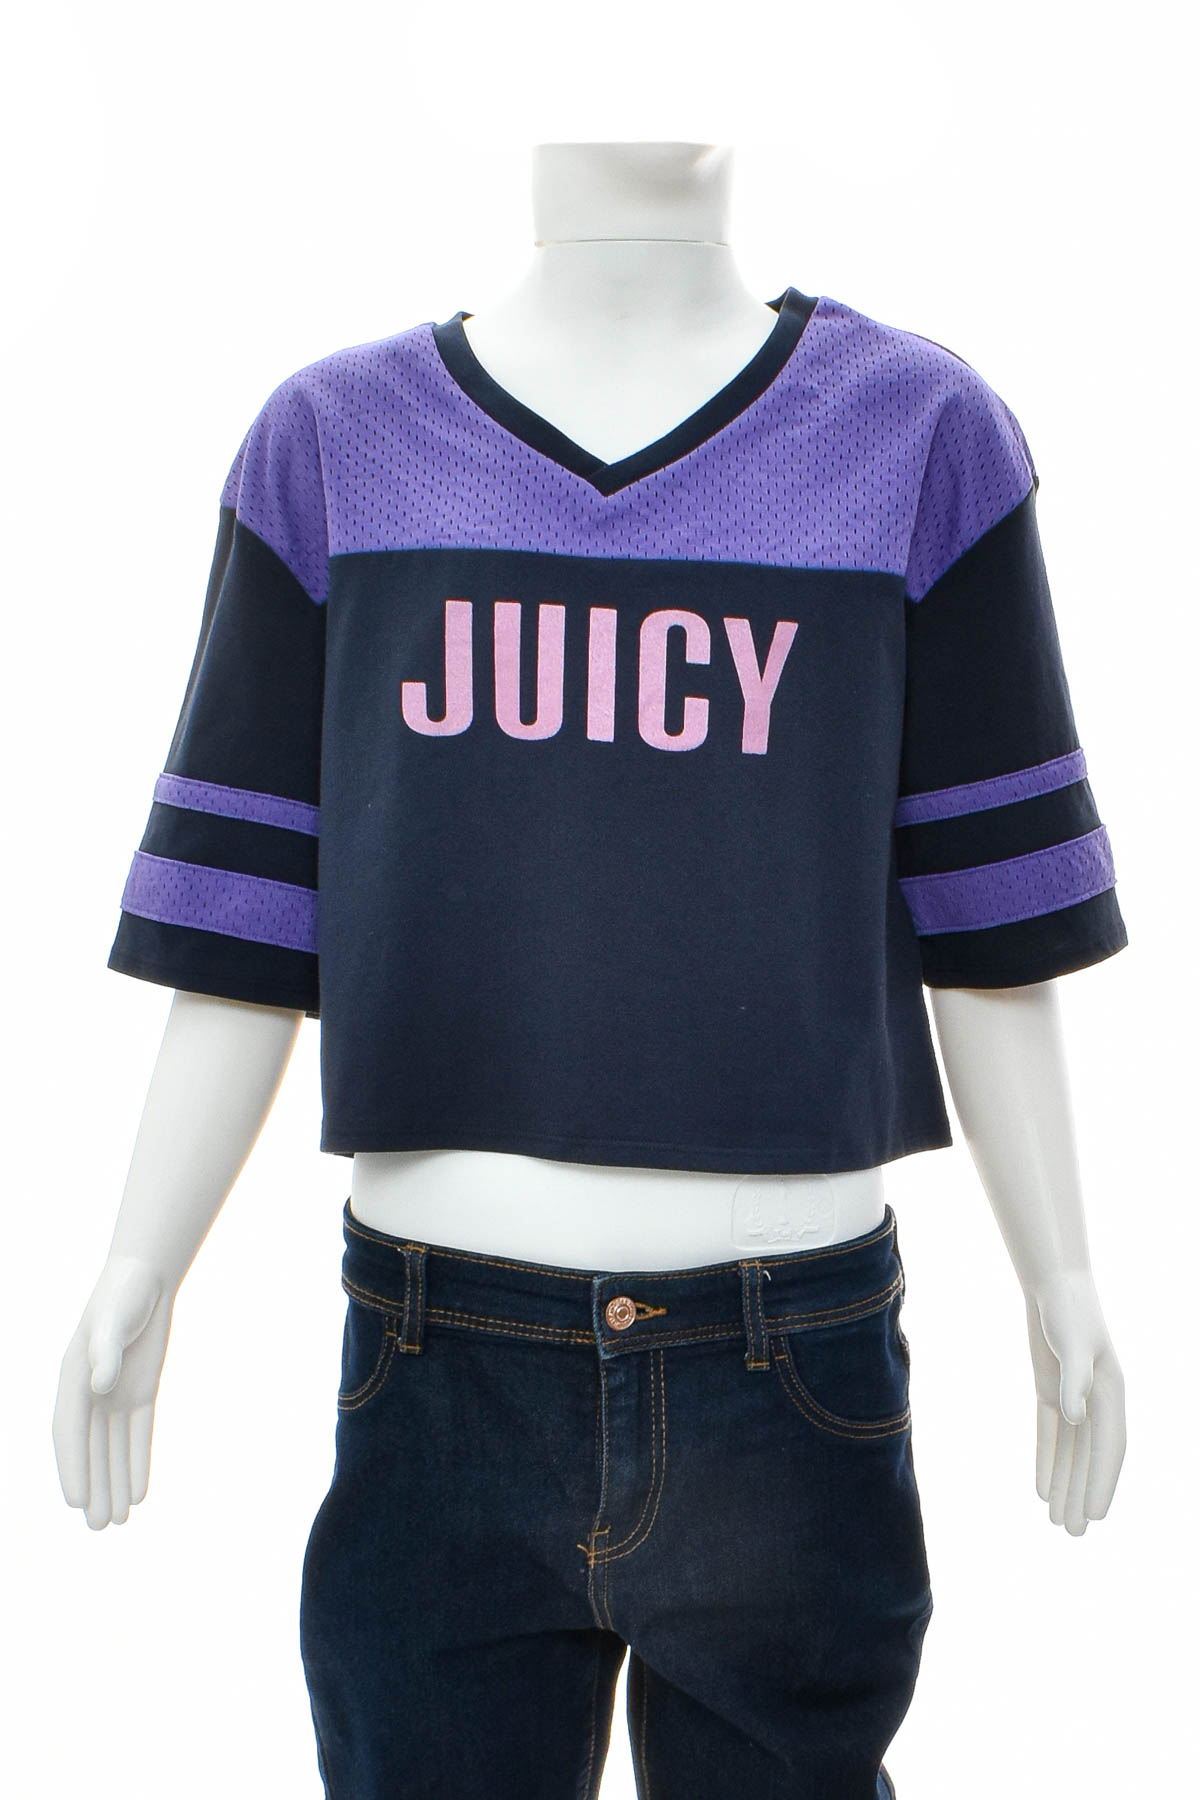 Girls' t-shirt - JUICY BY JUICY COUTURE - 0